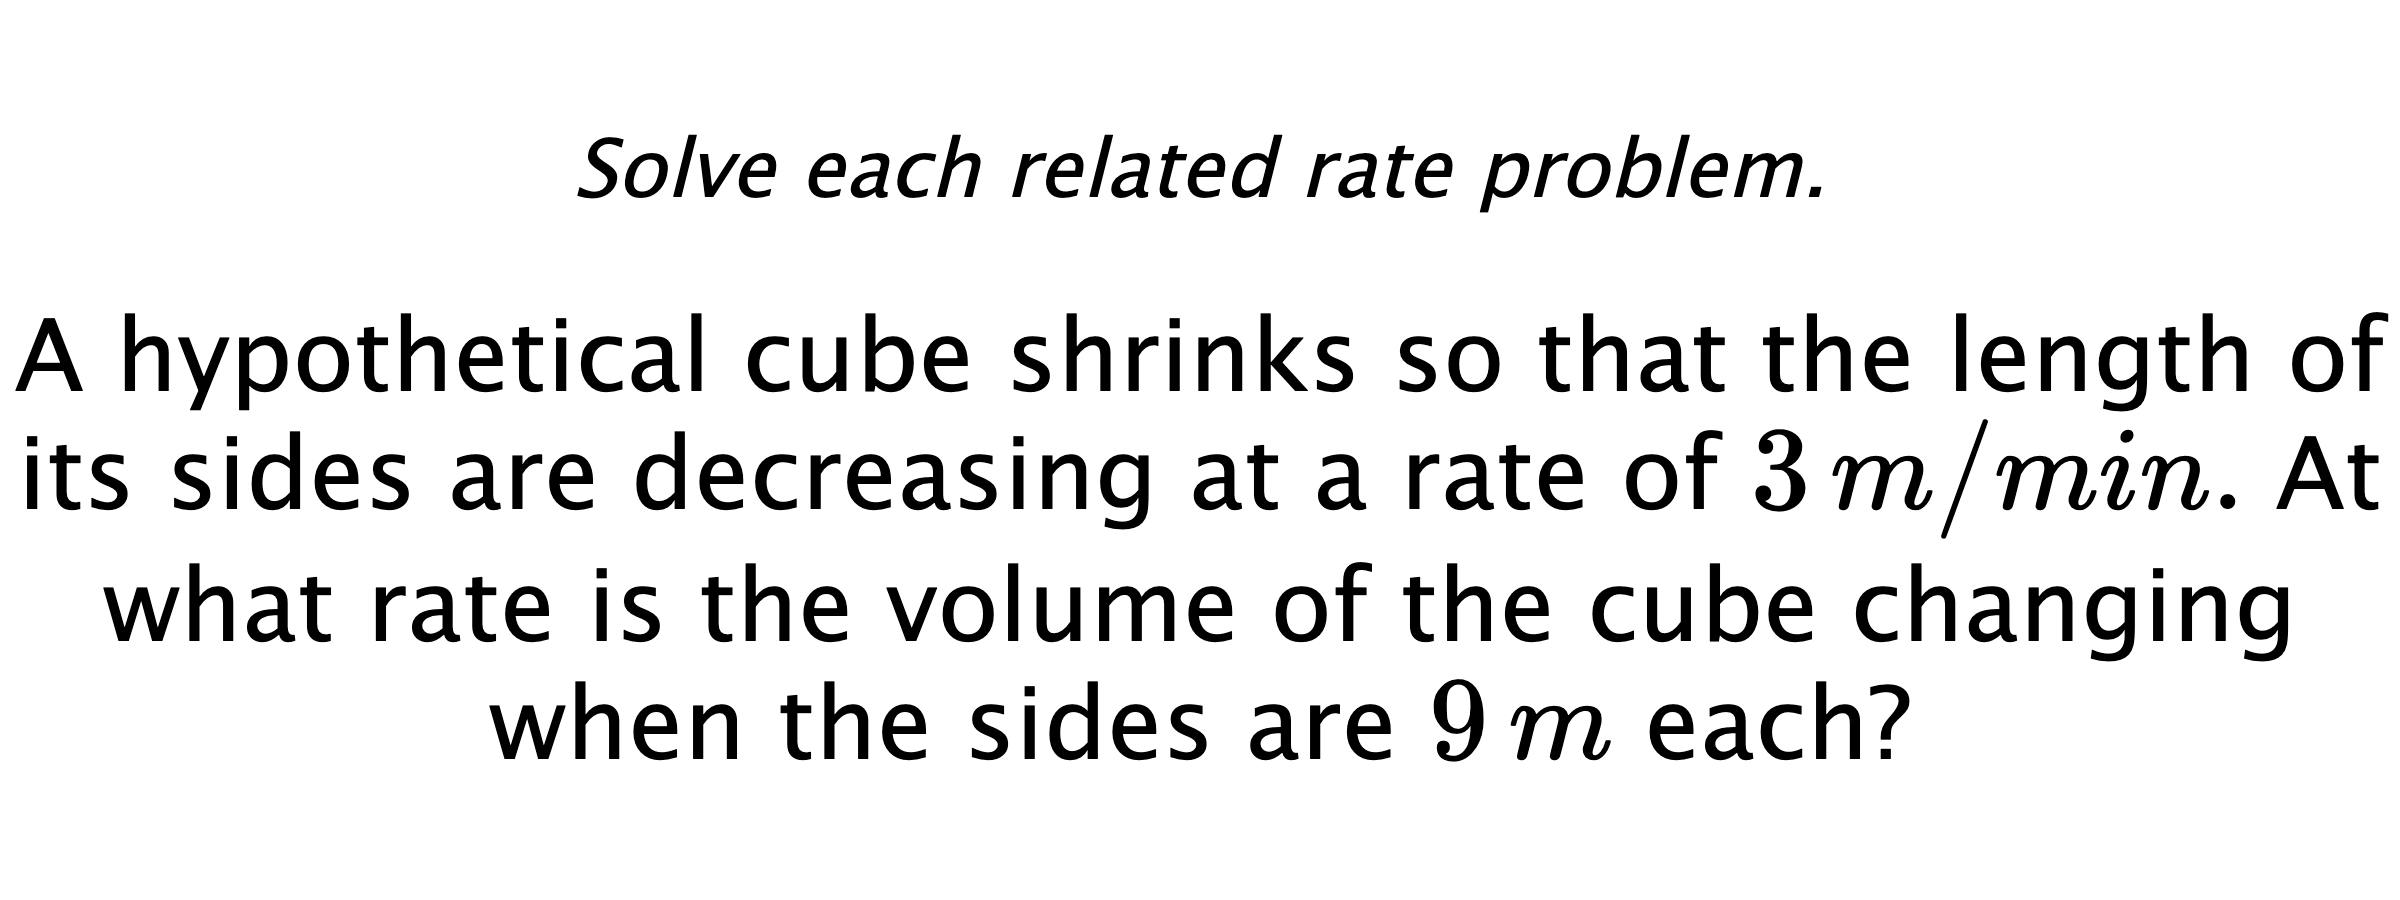 Solve each related rate problem. A hypothetical cube shrinks so that the length of its sides are decreasing at a rate of $3\,m/min.$ At what rate is the volume of the cube changing when the sides are $9\,m$ each?